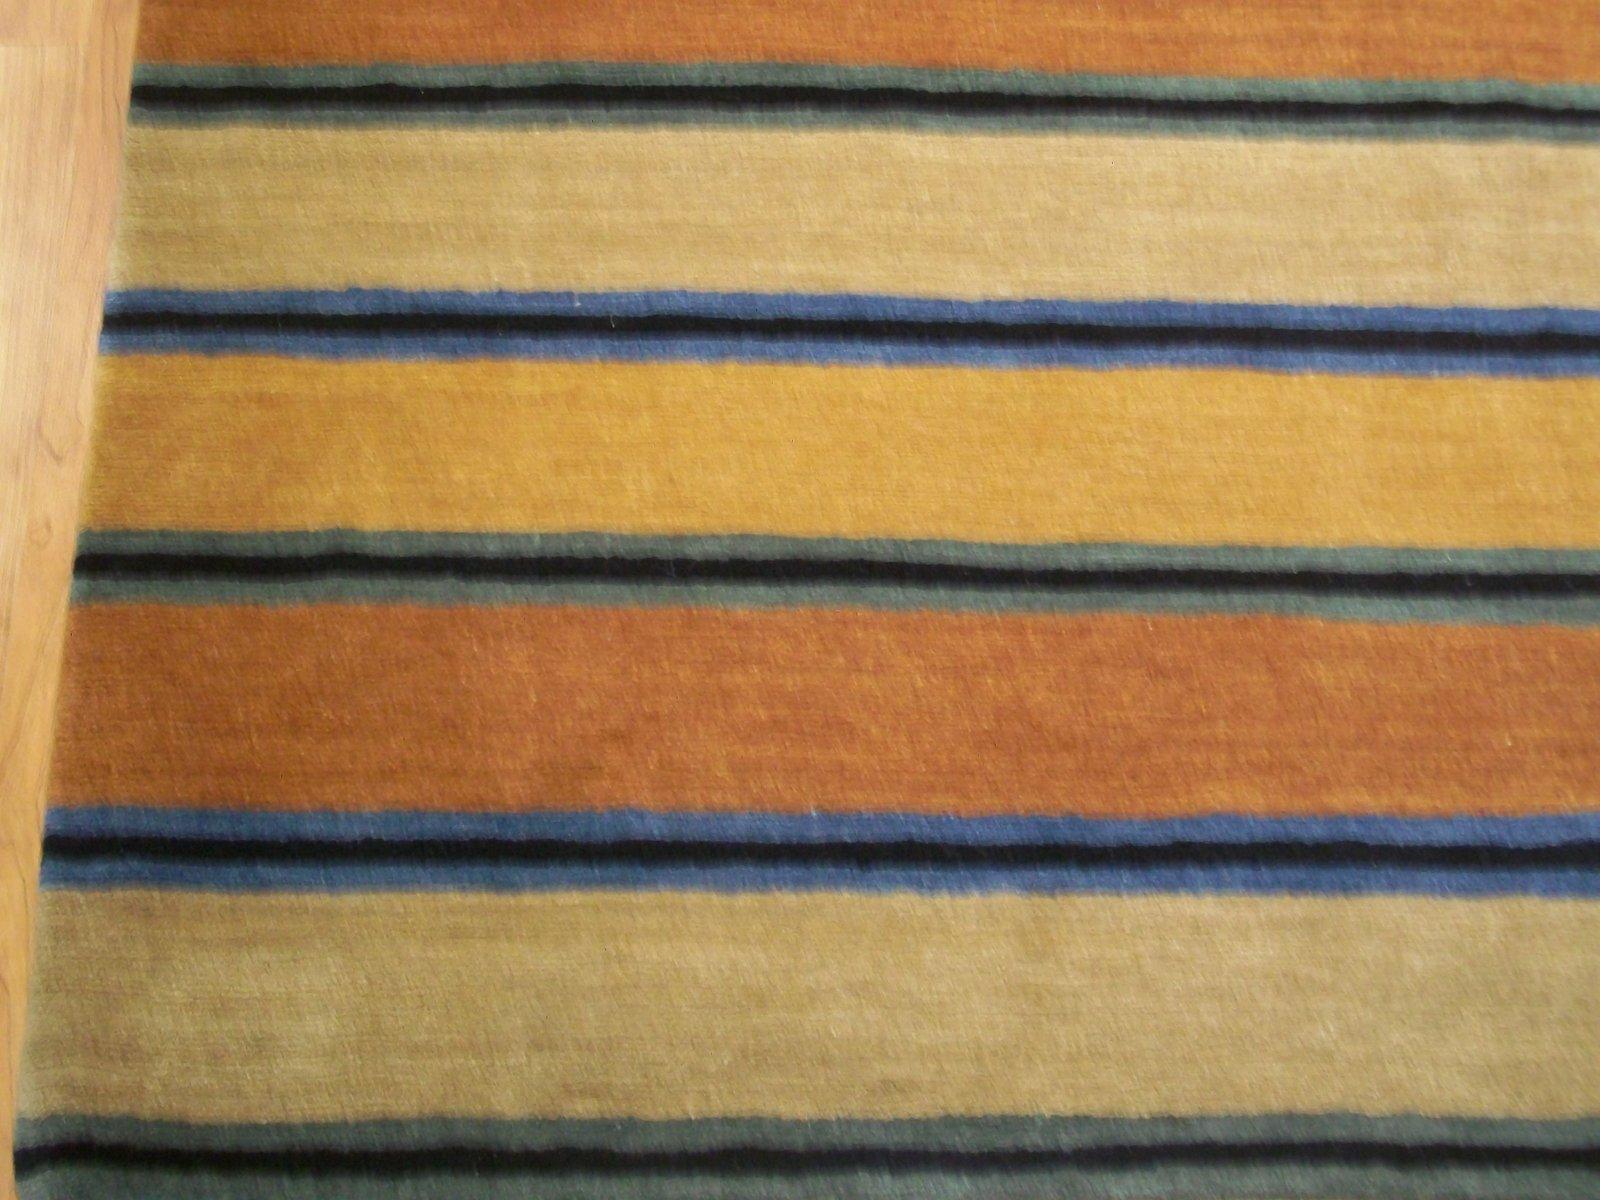 Contemporary stripe rug
Colors: Charcoal, rust, gold, beige and blue.